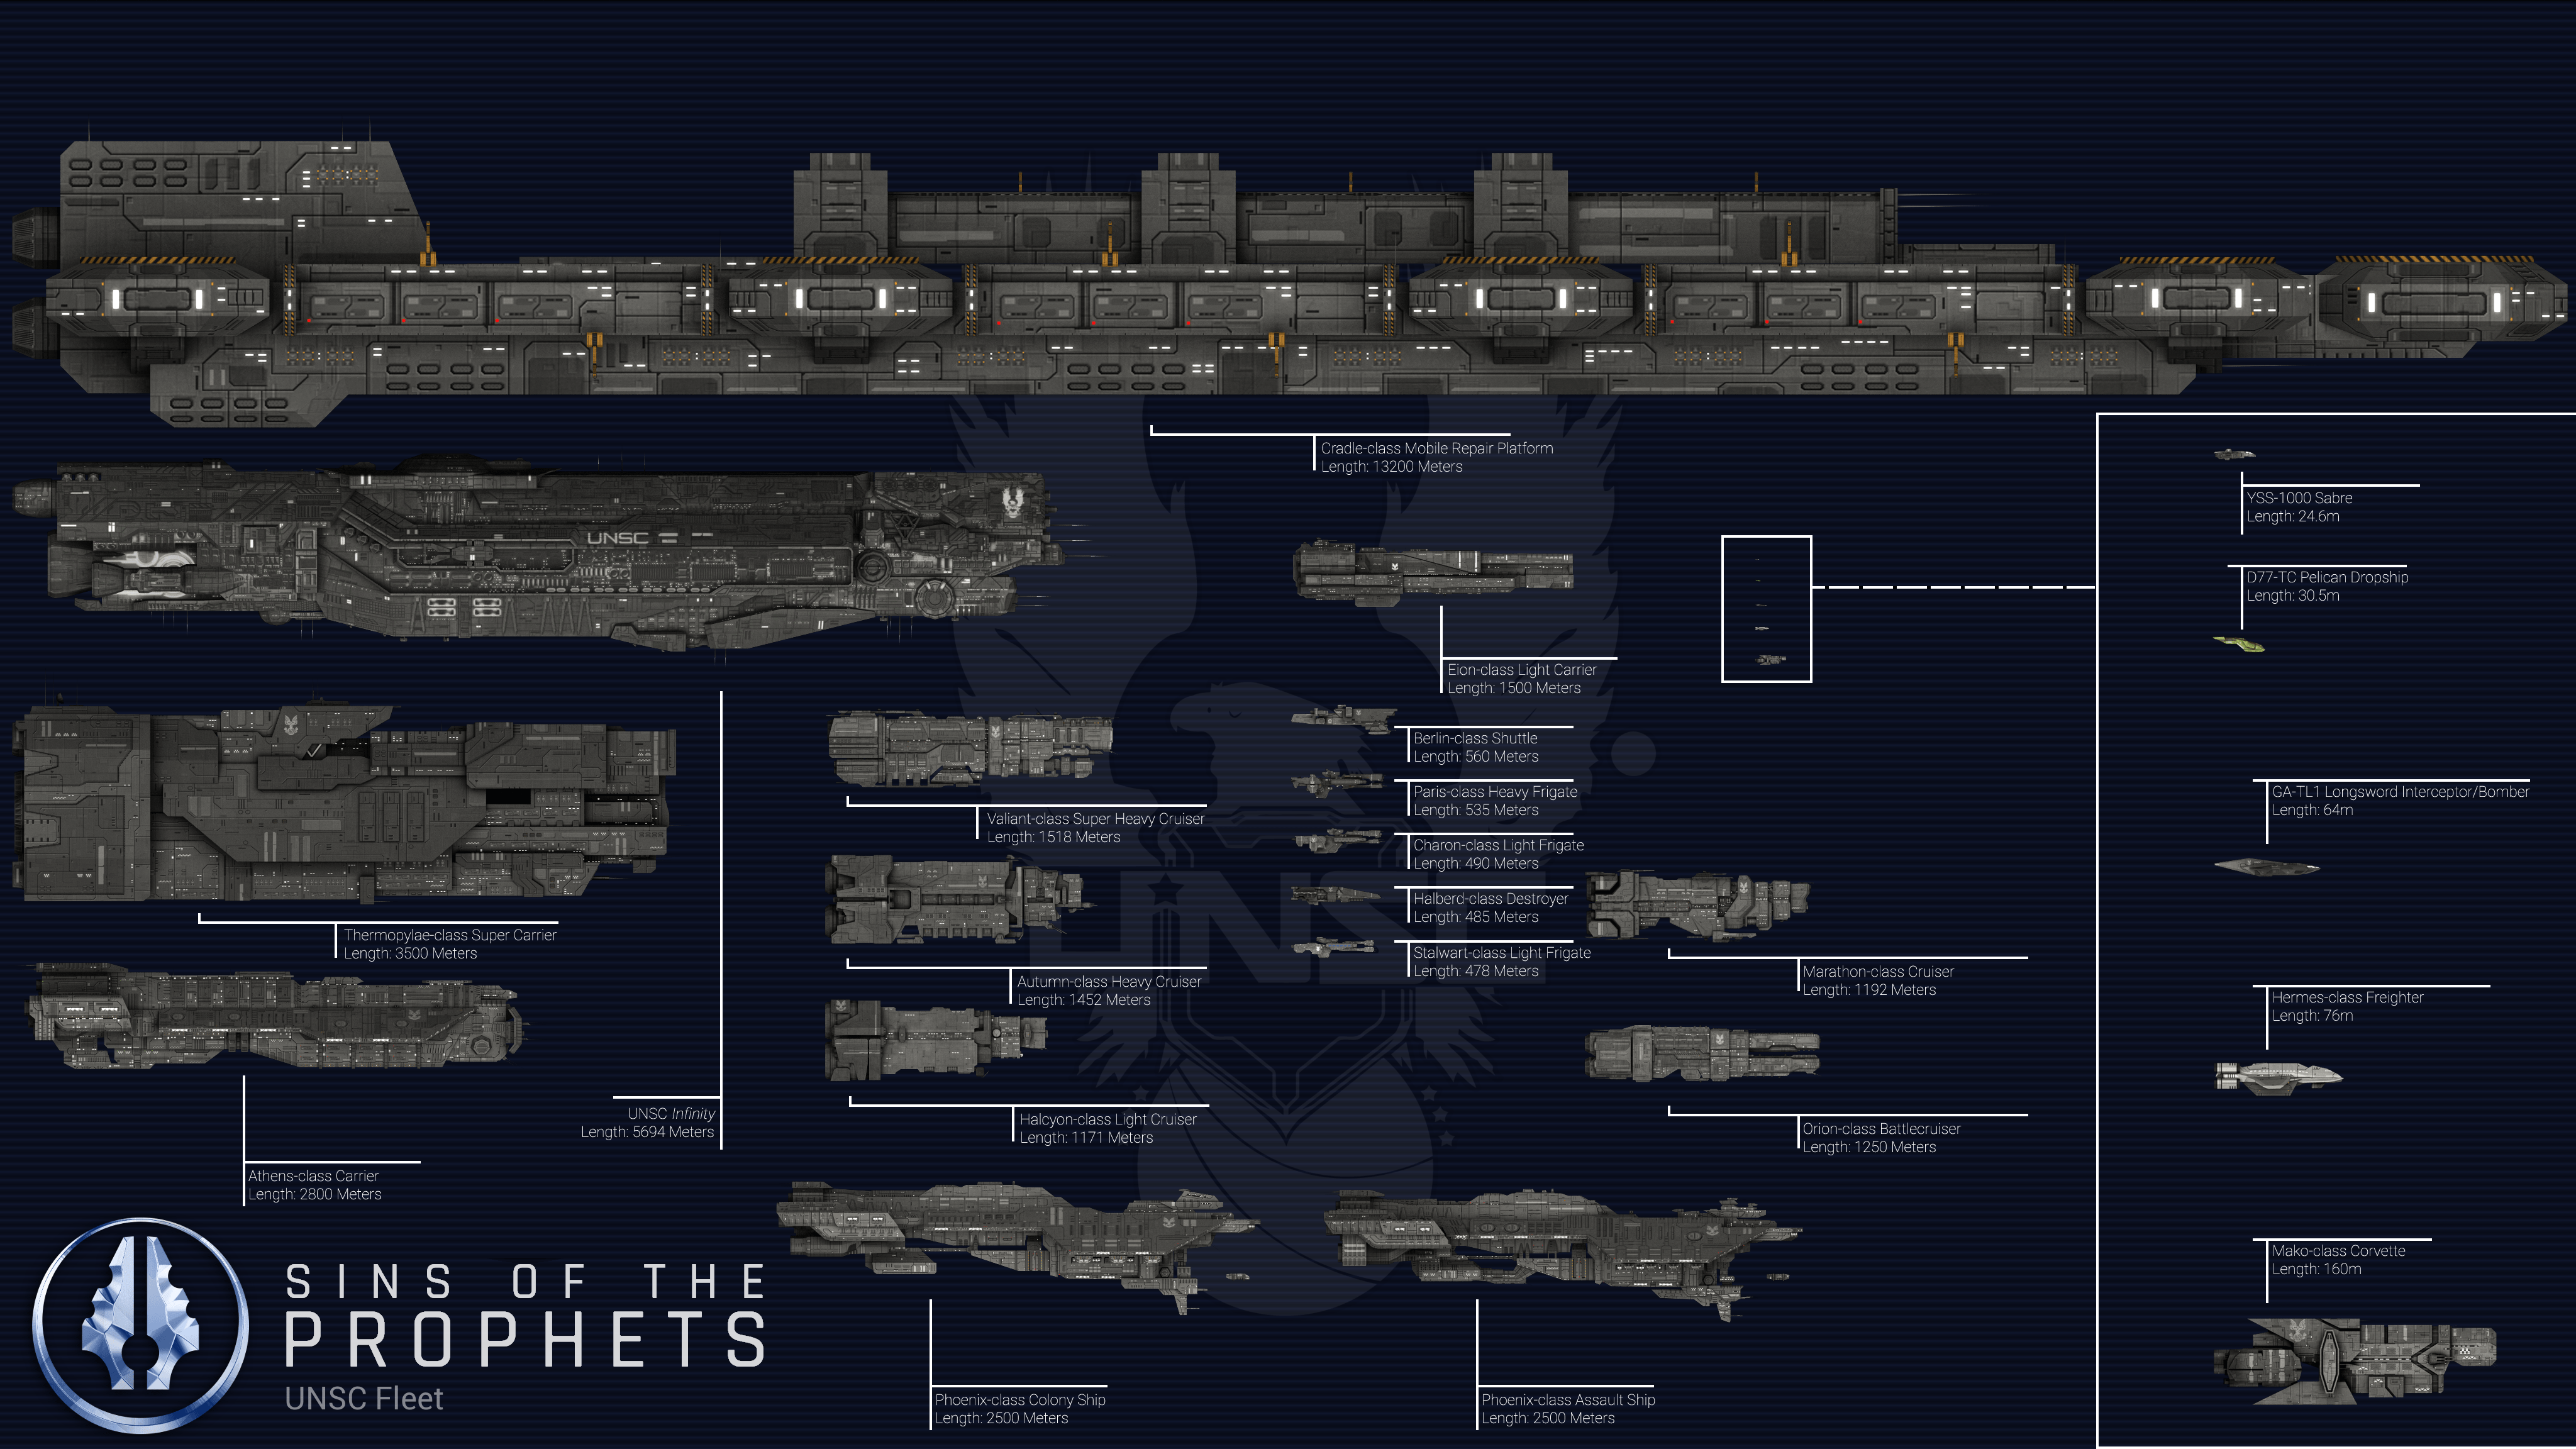 UNSC Ship Scale Chart for Sins of the Prophets 4K resolution